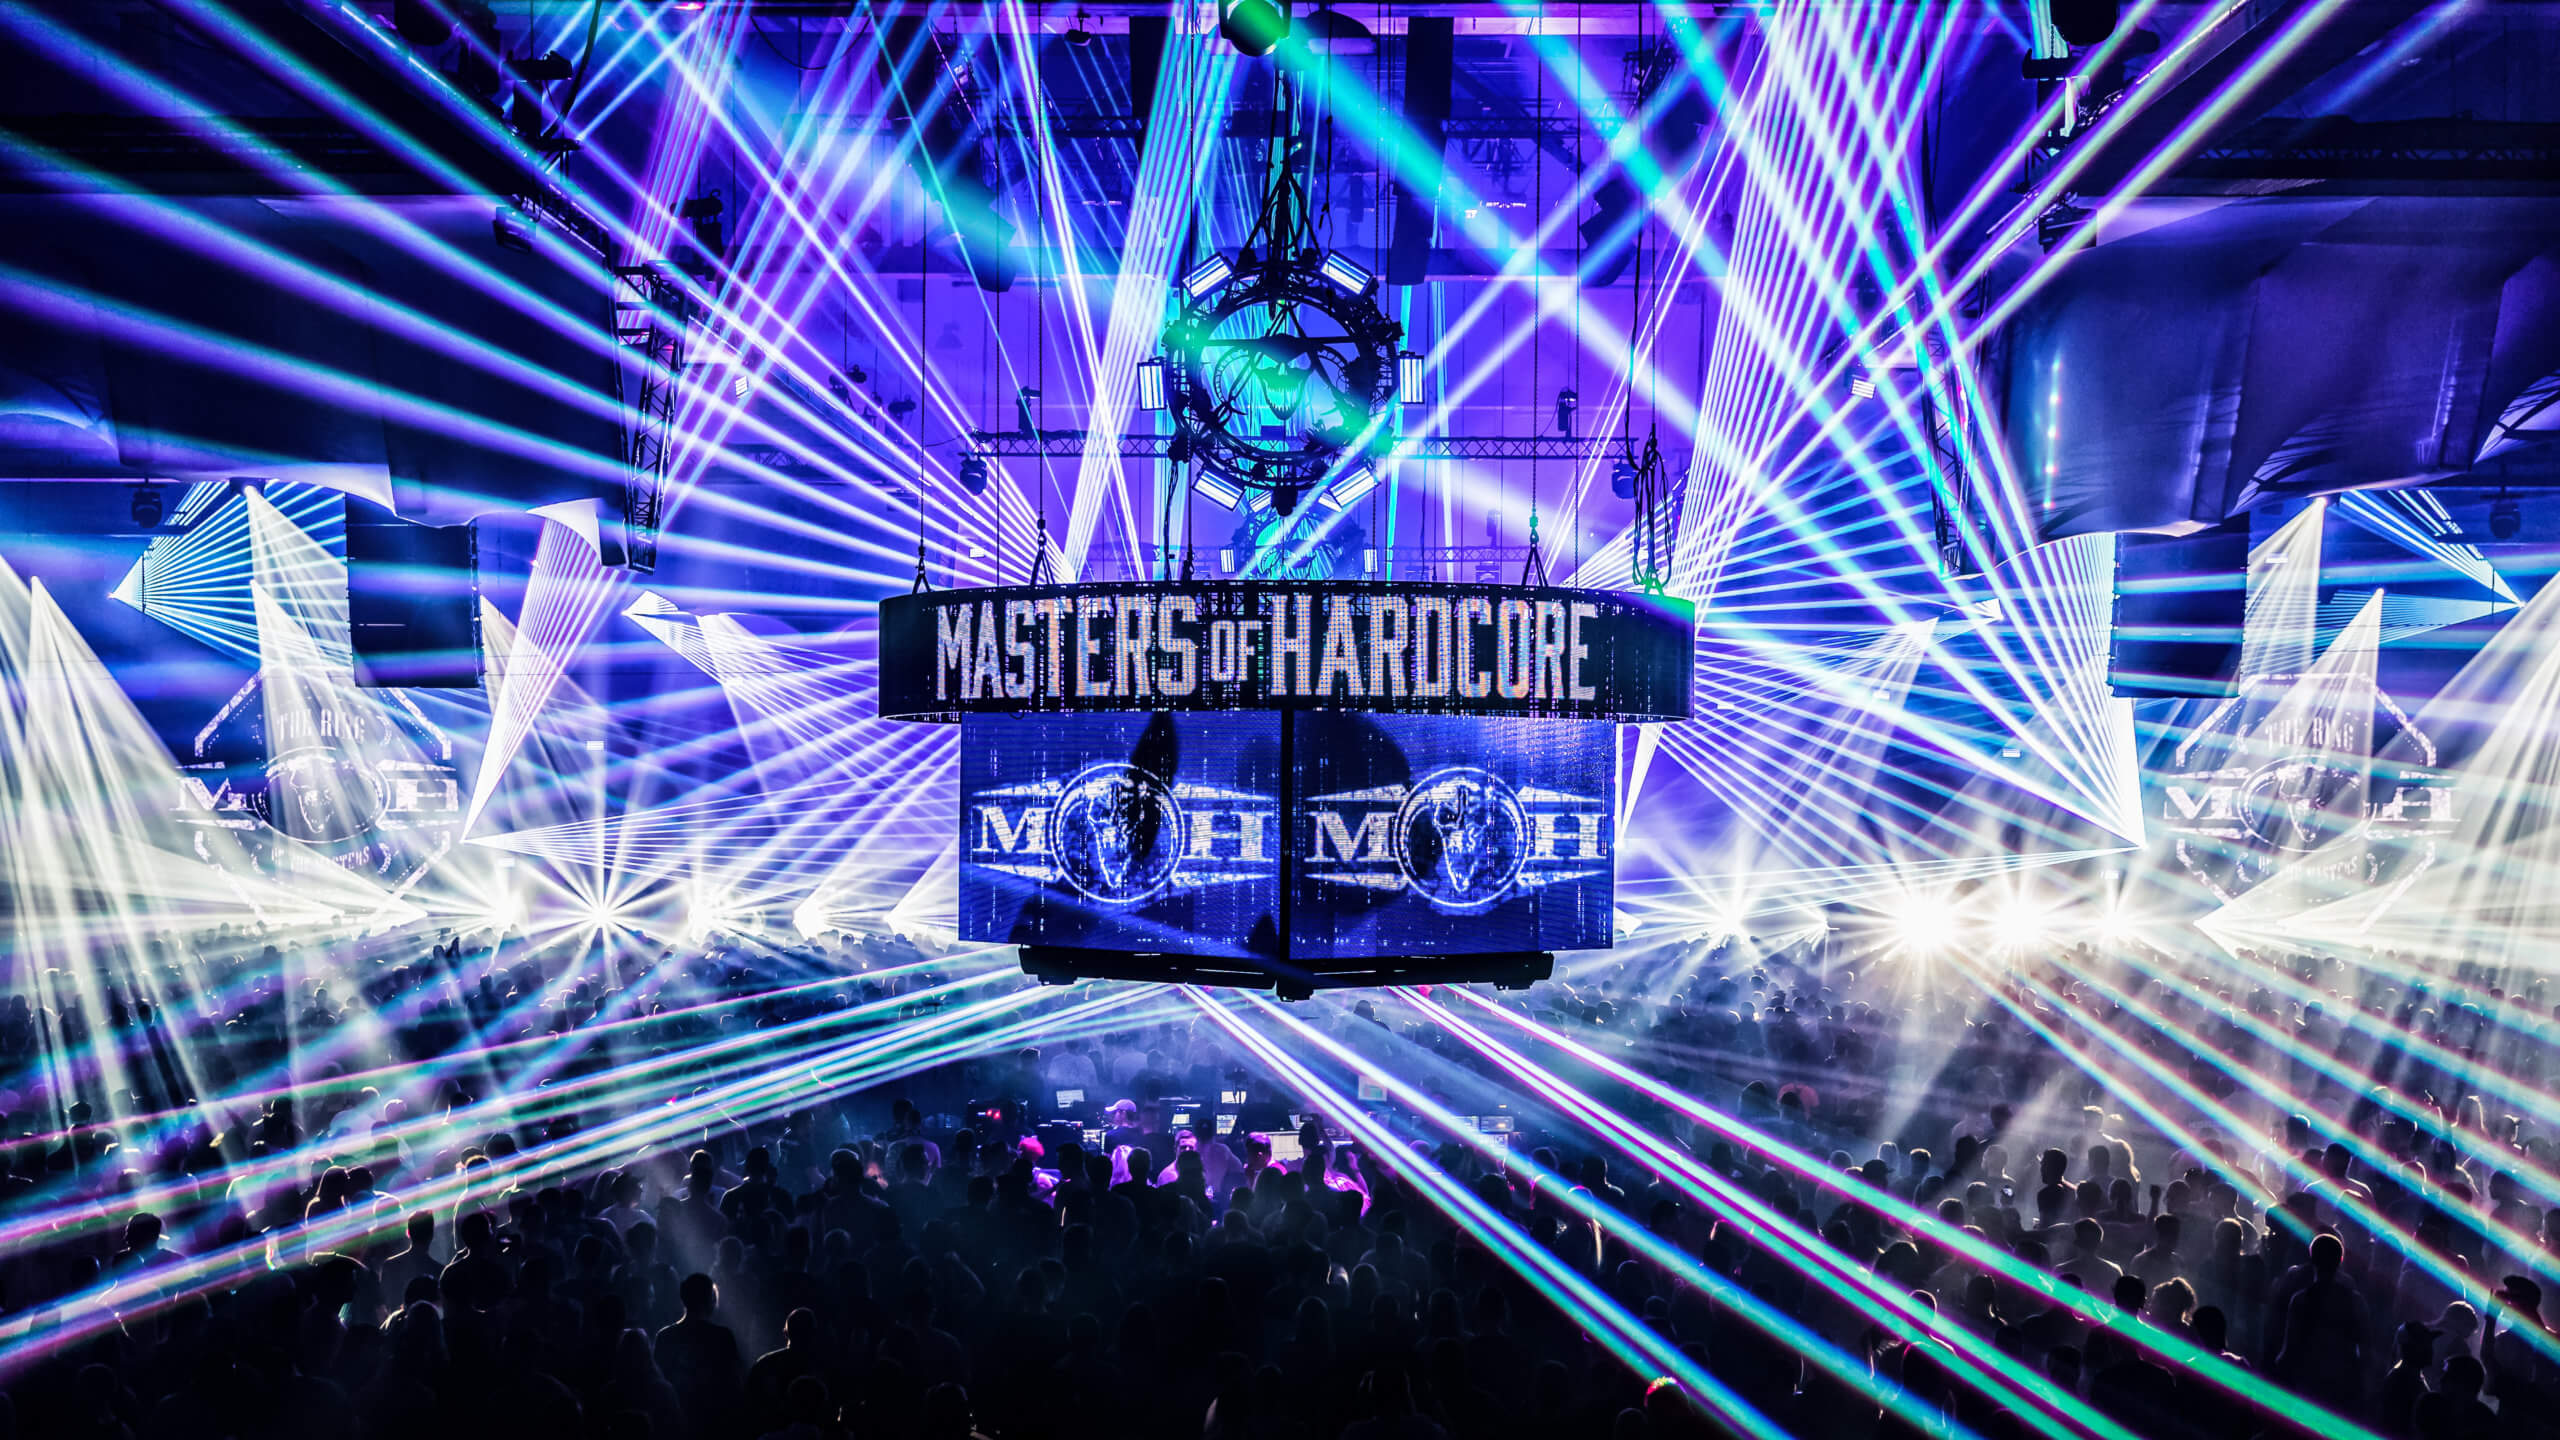 Go back to the year 2019 with this Yearmix from Masters of Hardcore